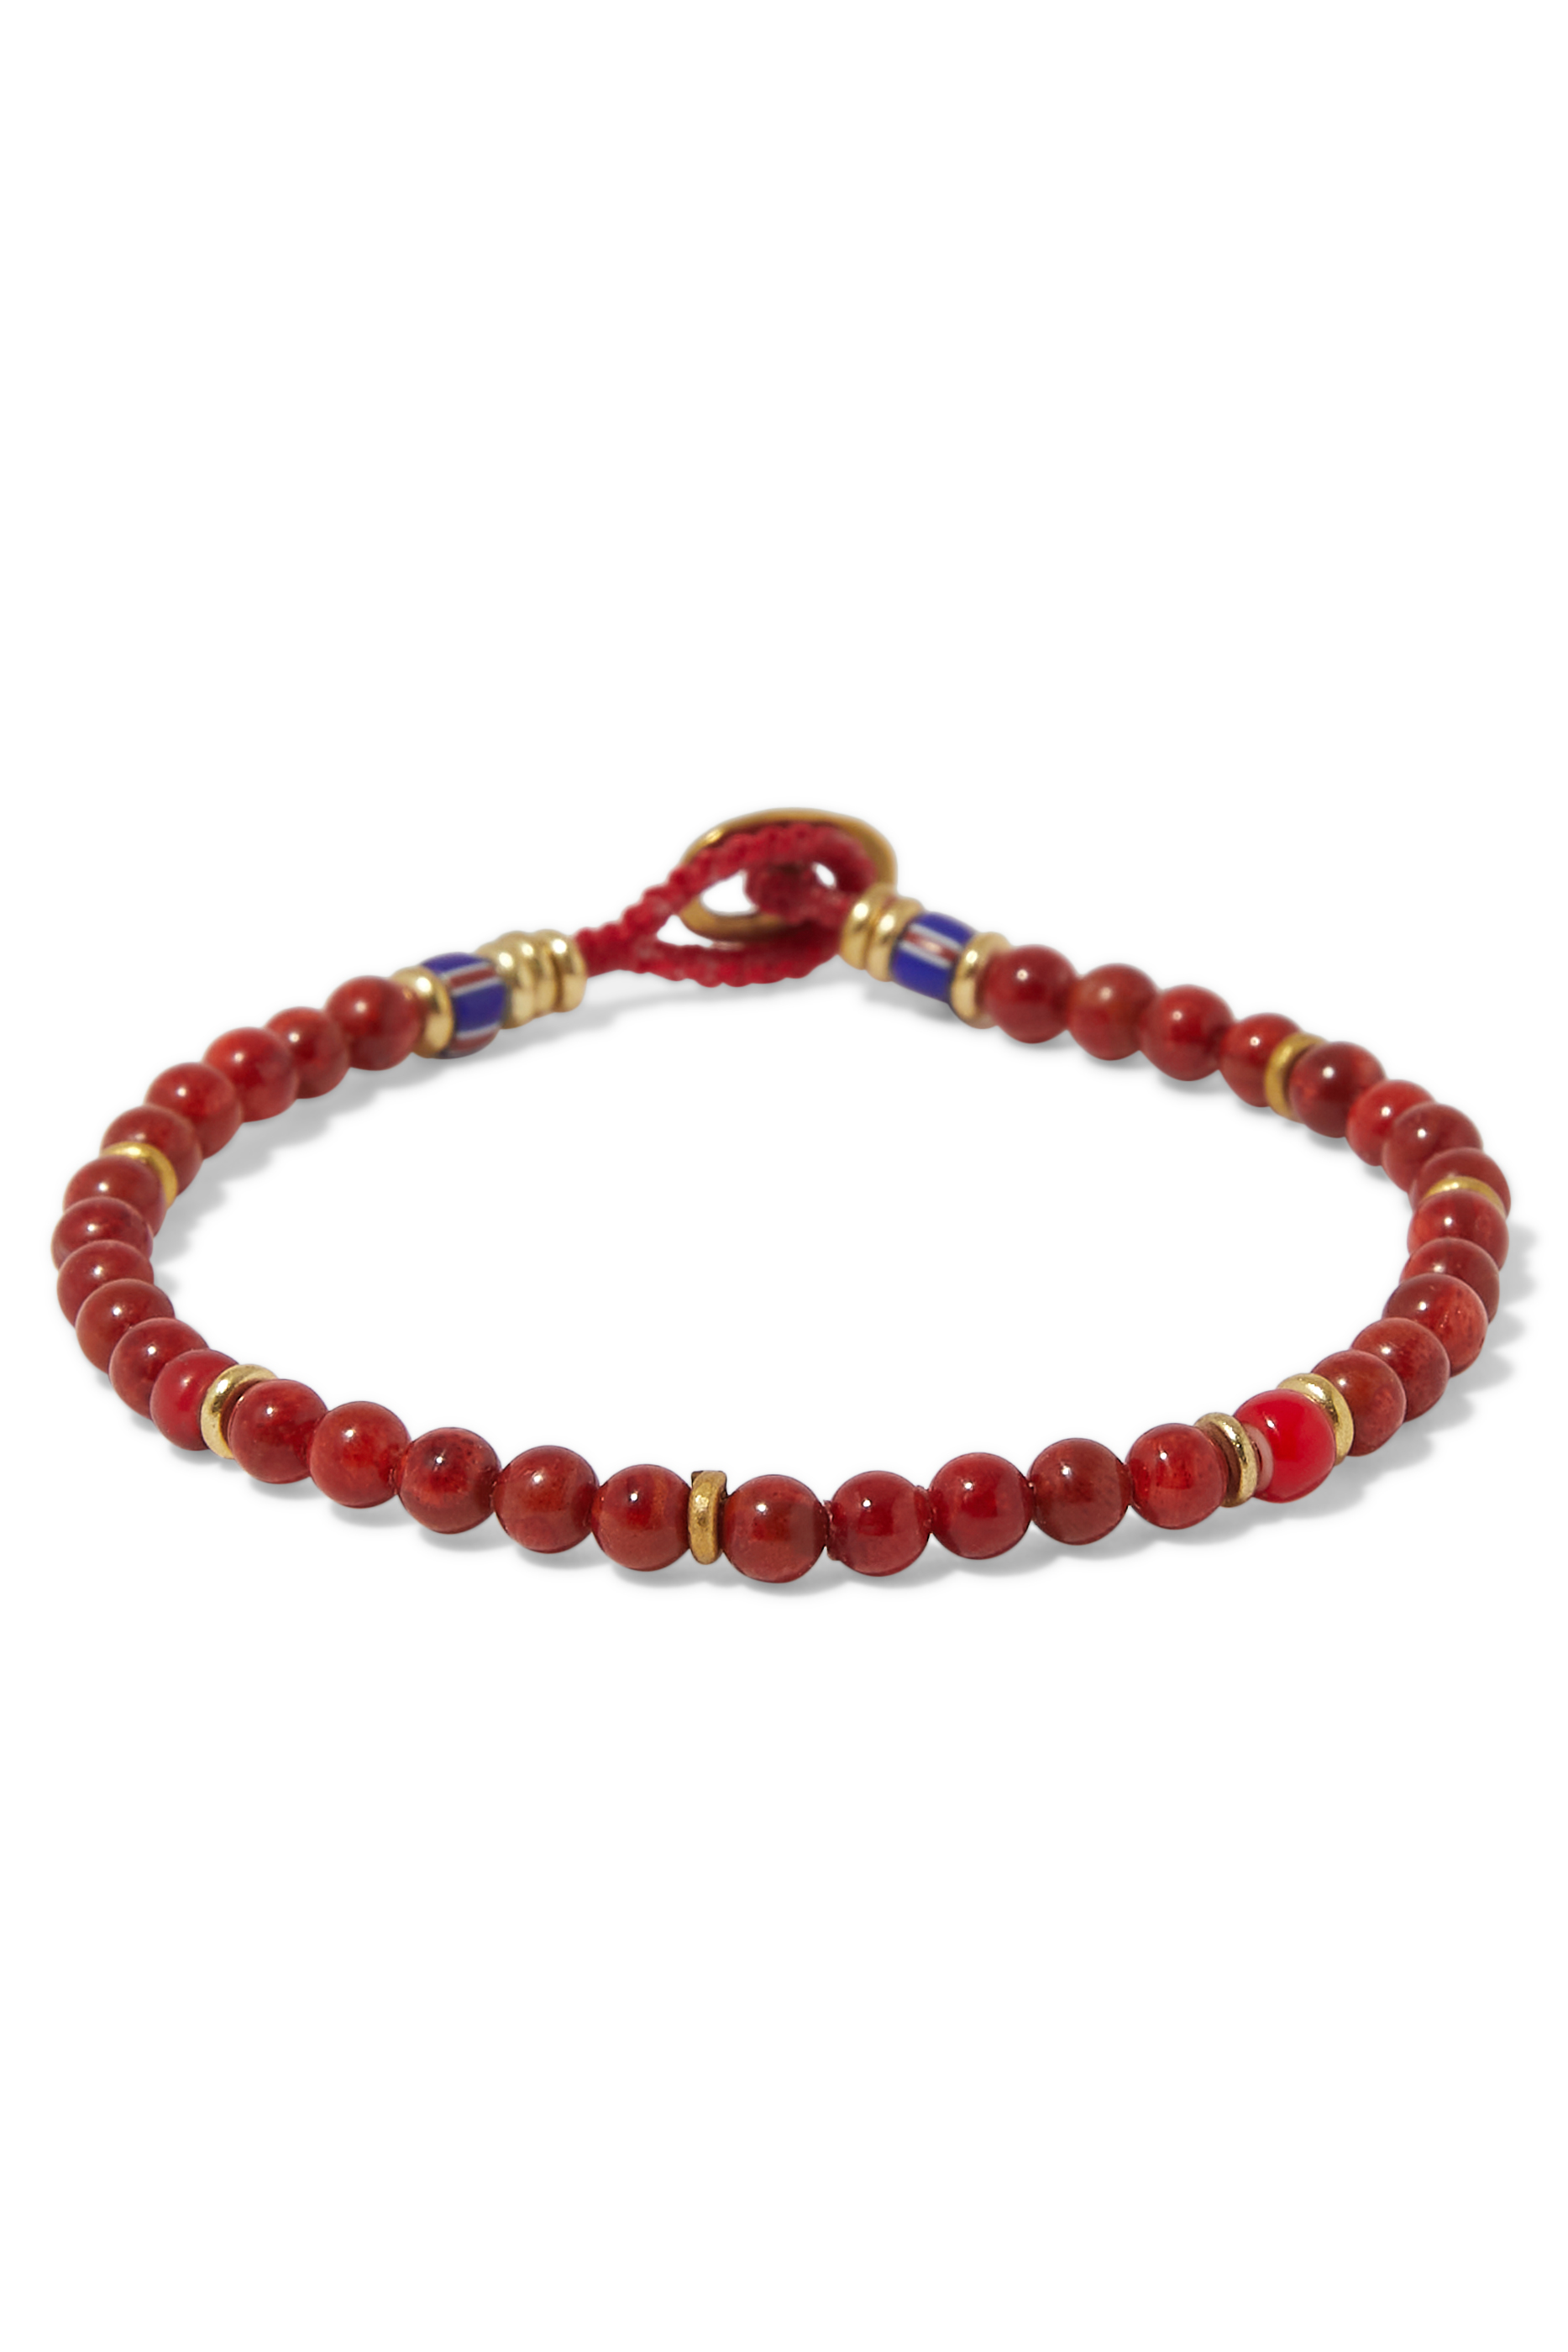 Buy Mikia Coral Bracelet - Mens for AED 315.00 Fashion Jewelry ...